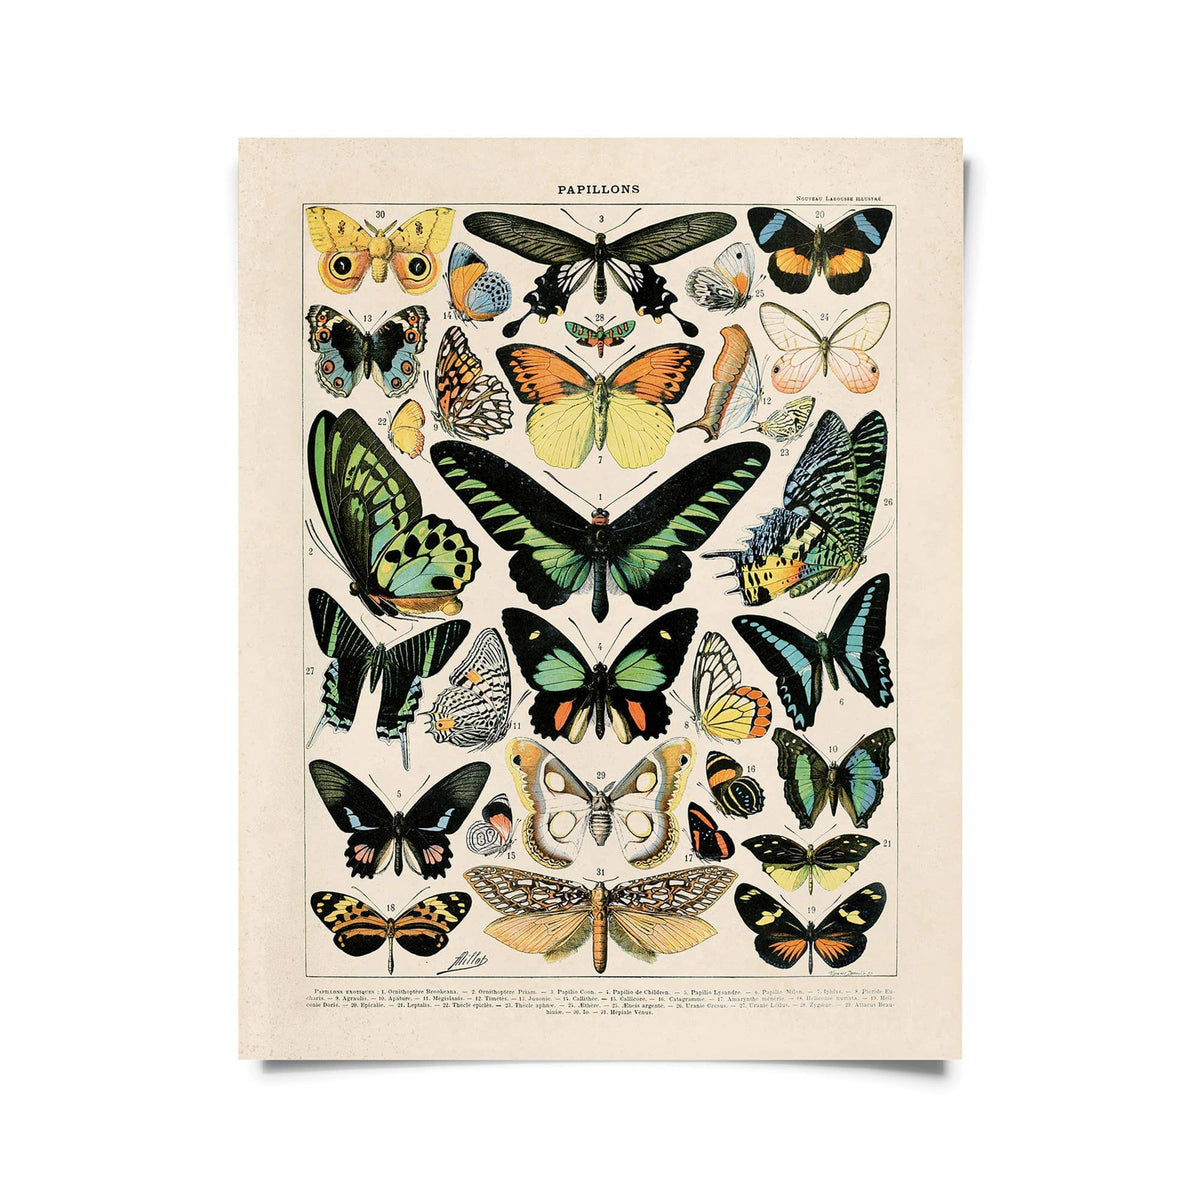 Curious Prints Giclee Print 11x14" (Unframed) Vintage Millot Butterfly No.1 Print